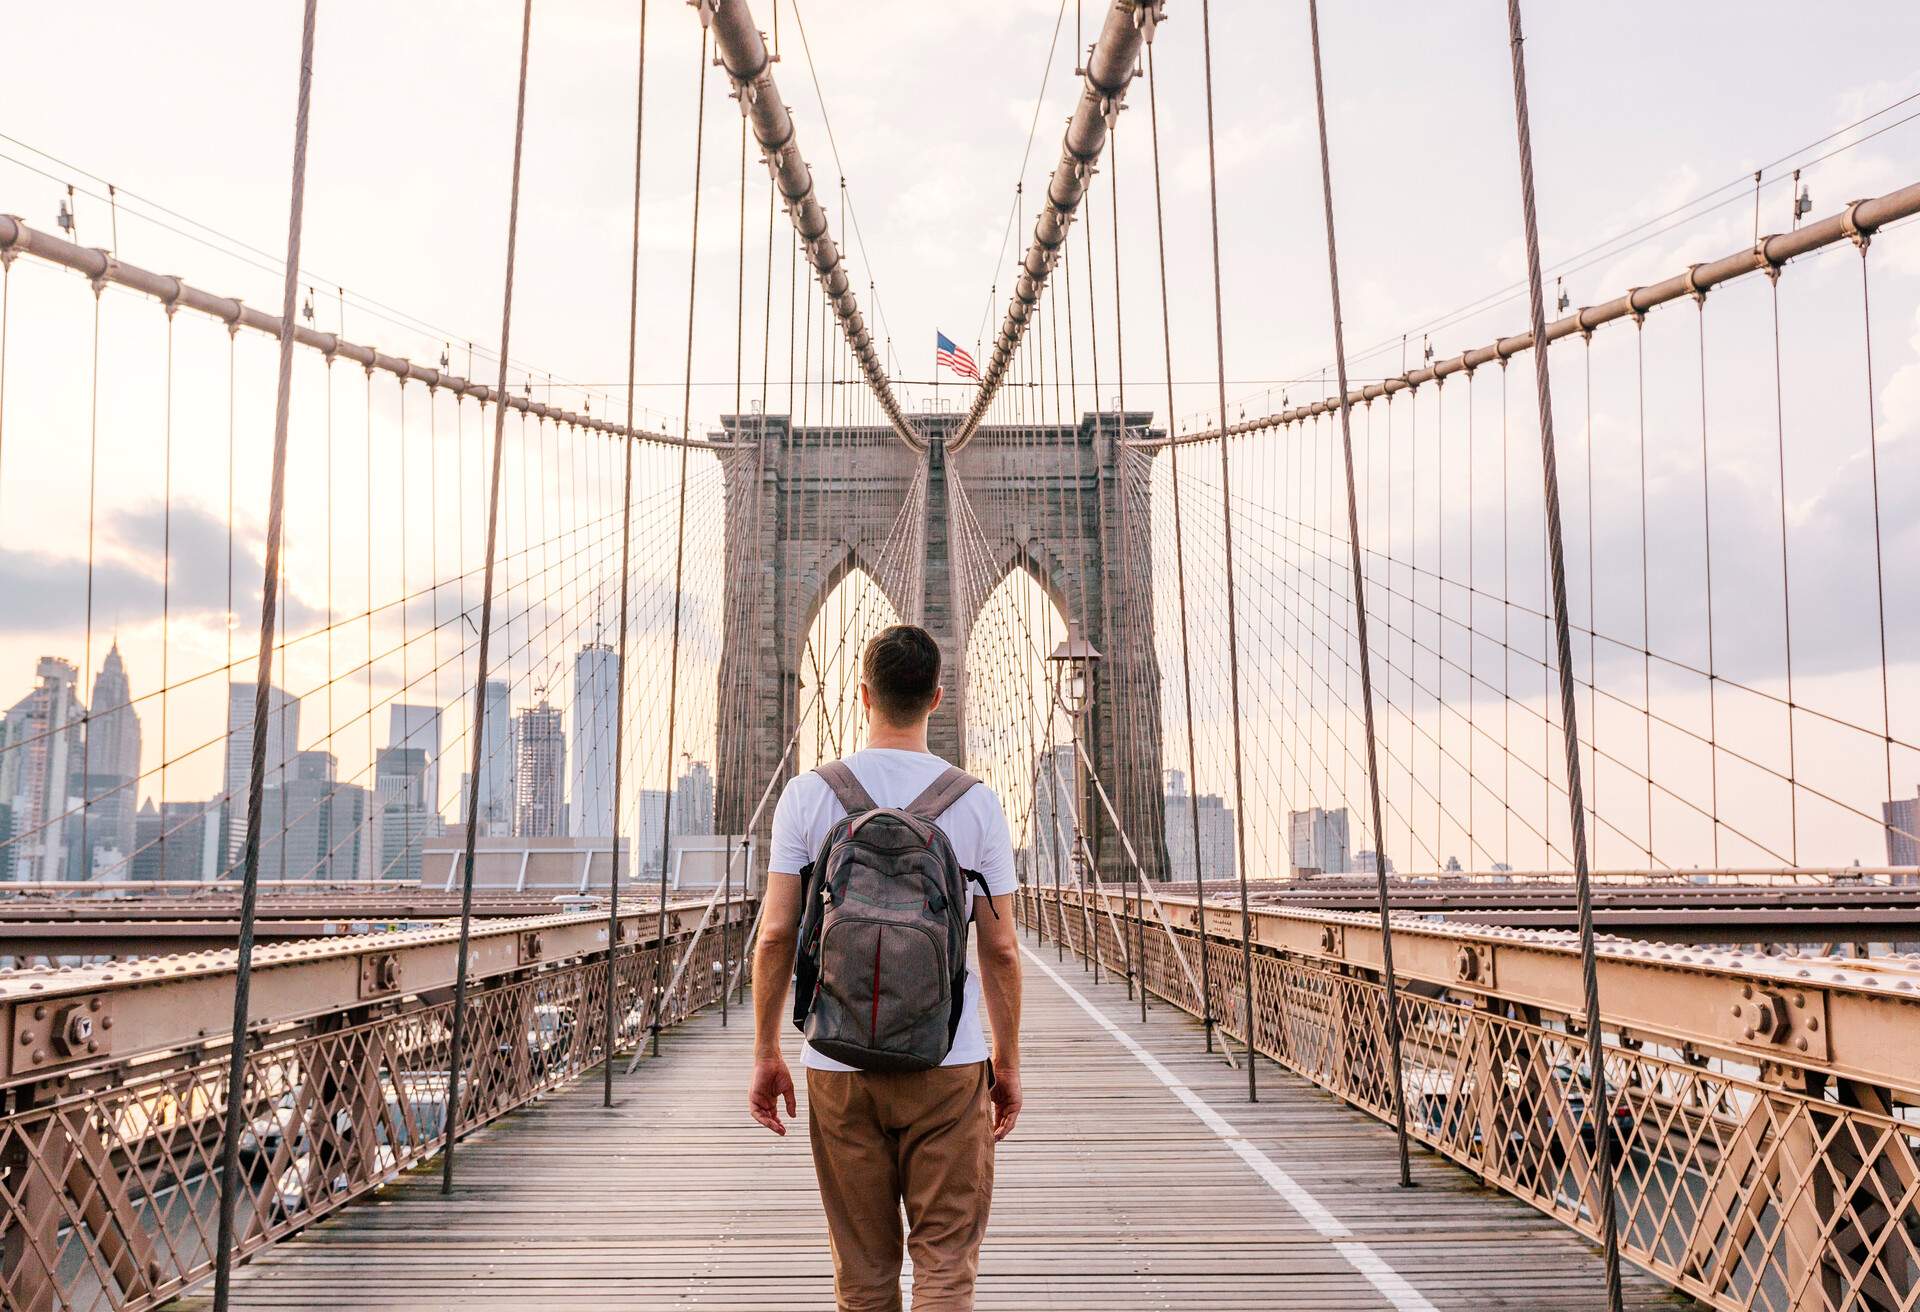 A man with a backpack walks on a footbridge with suspension cables against the backdrop of the city skyline.